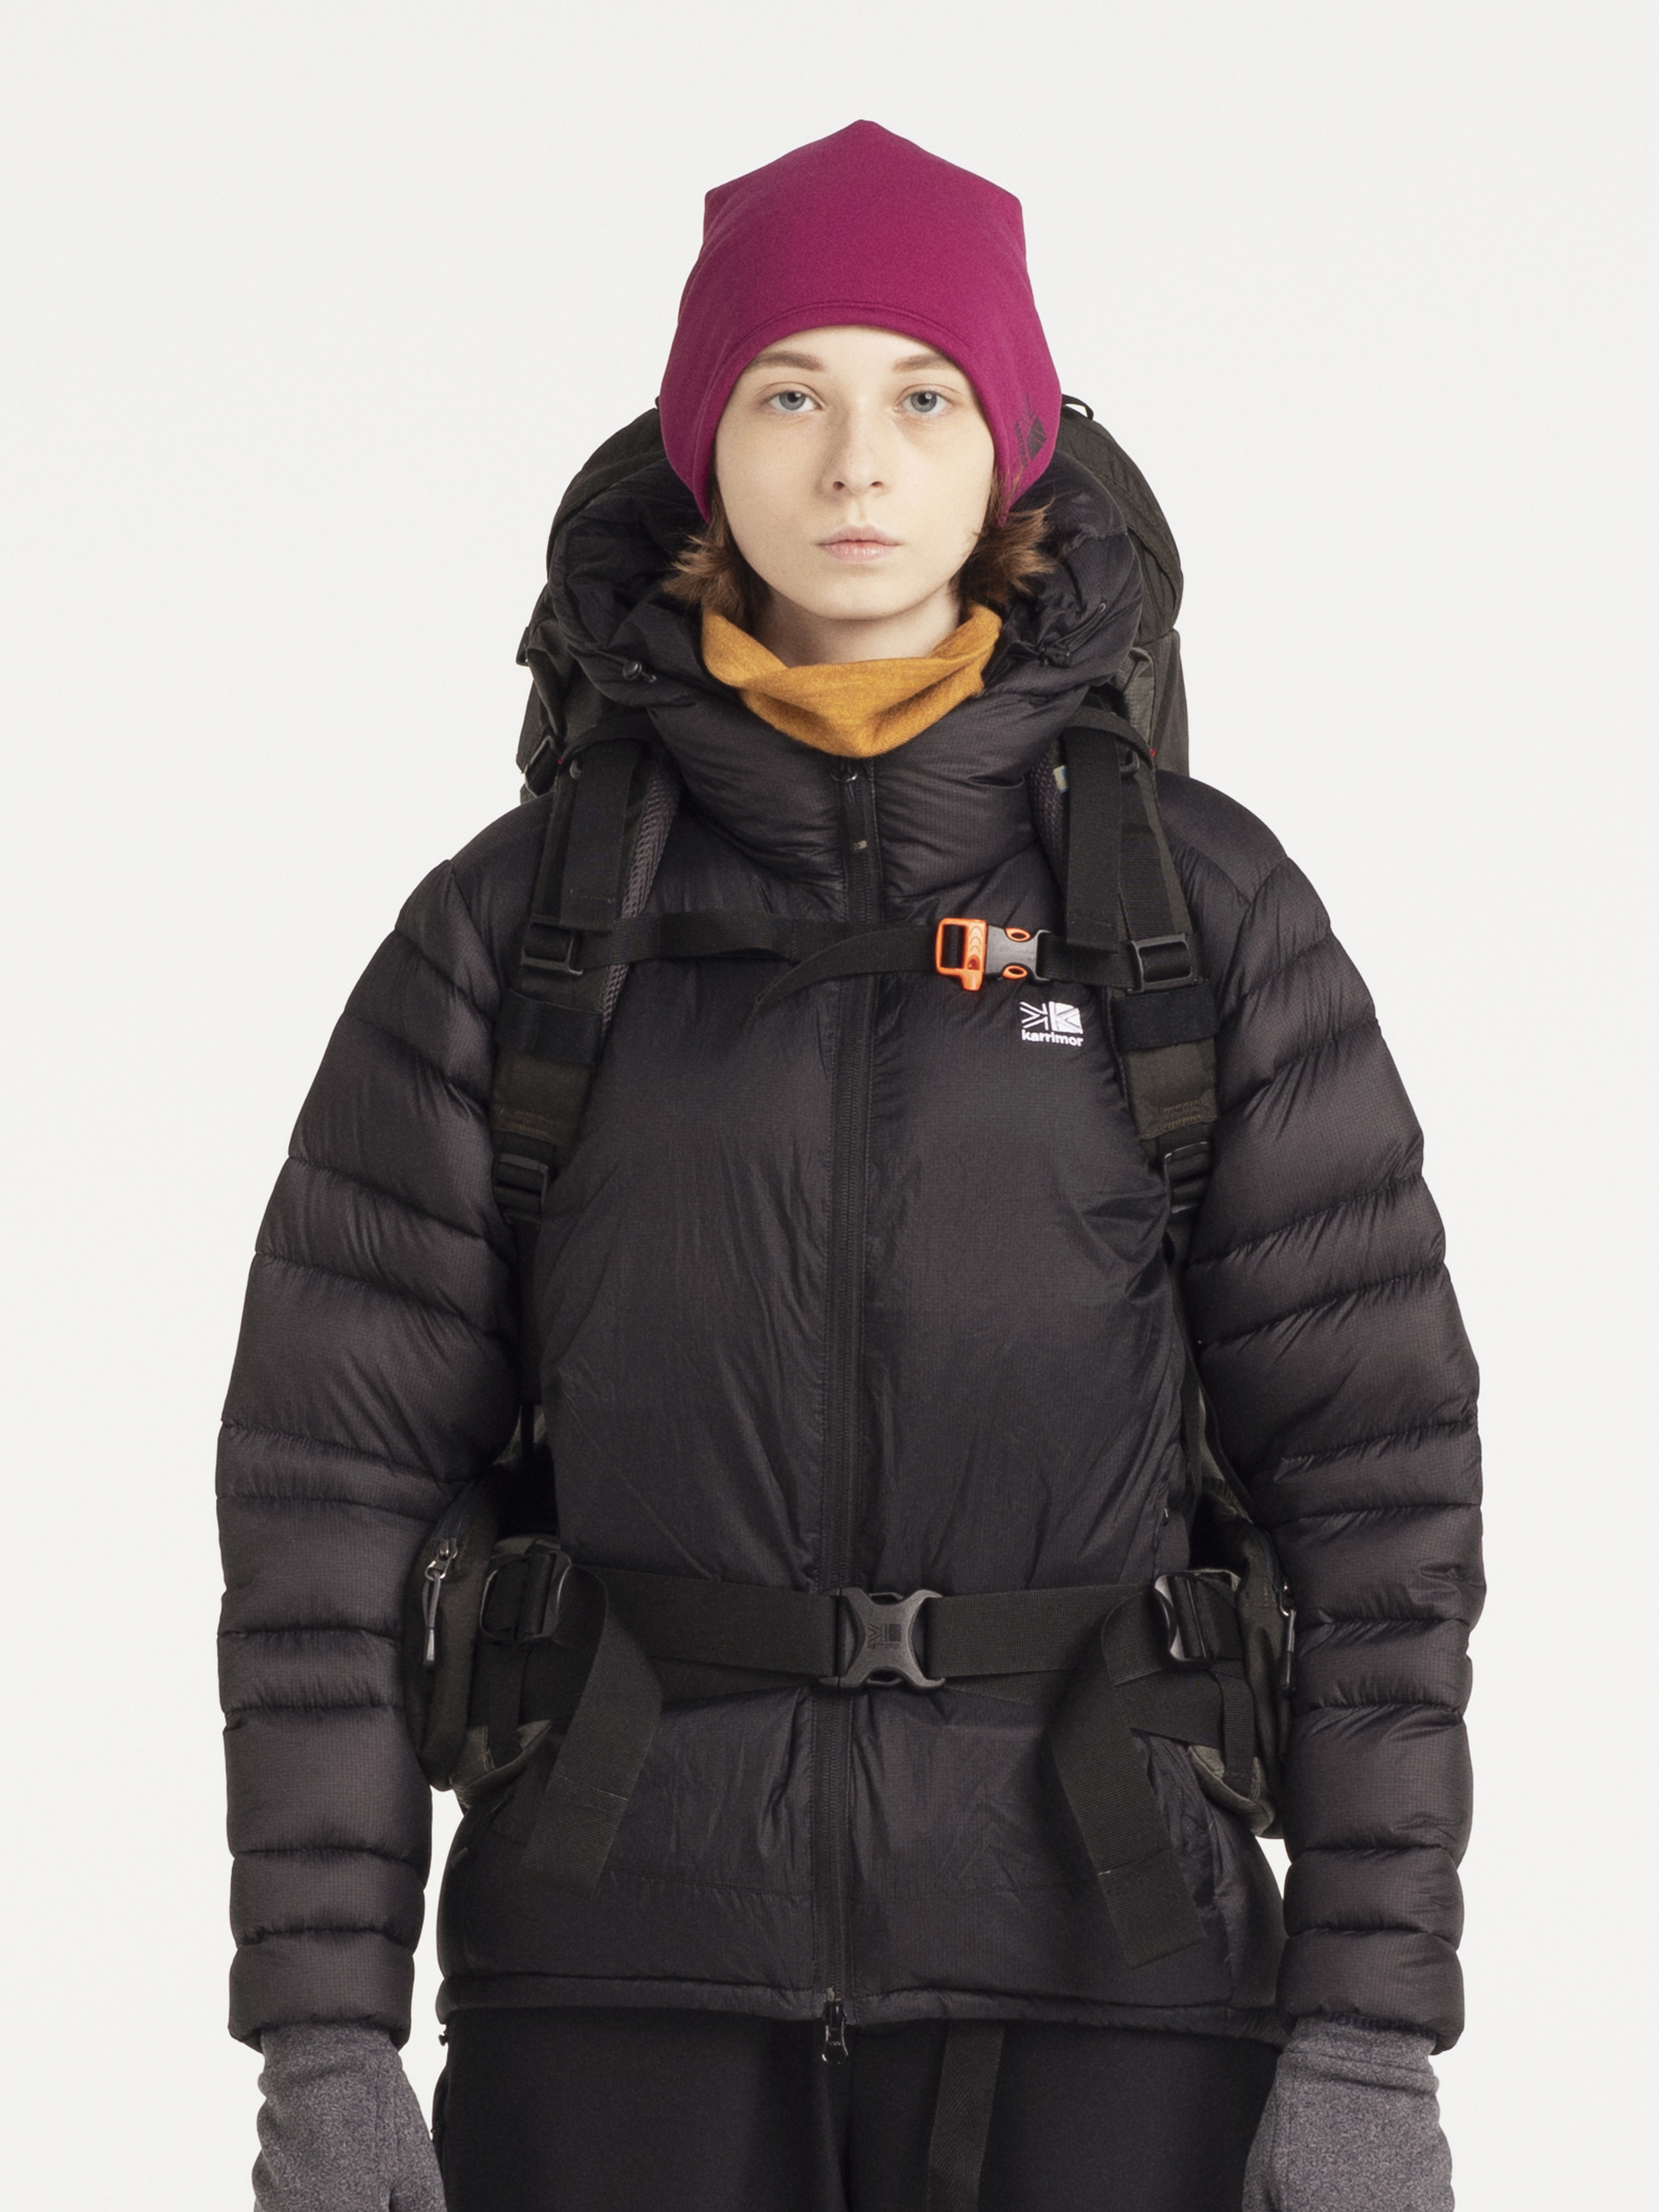 featherlite W's down parka | karrimor カリマー | リュックサック 